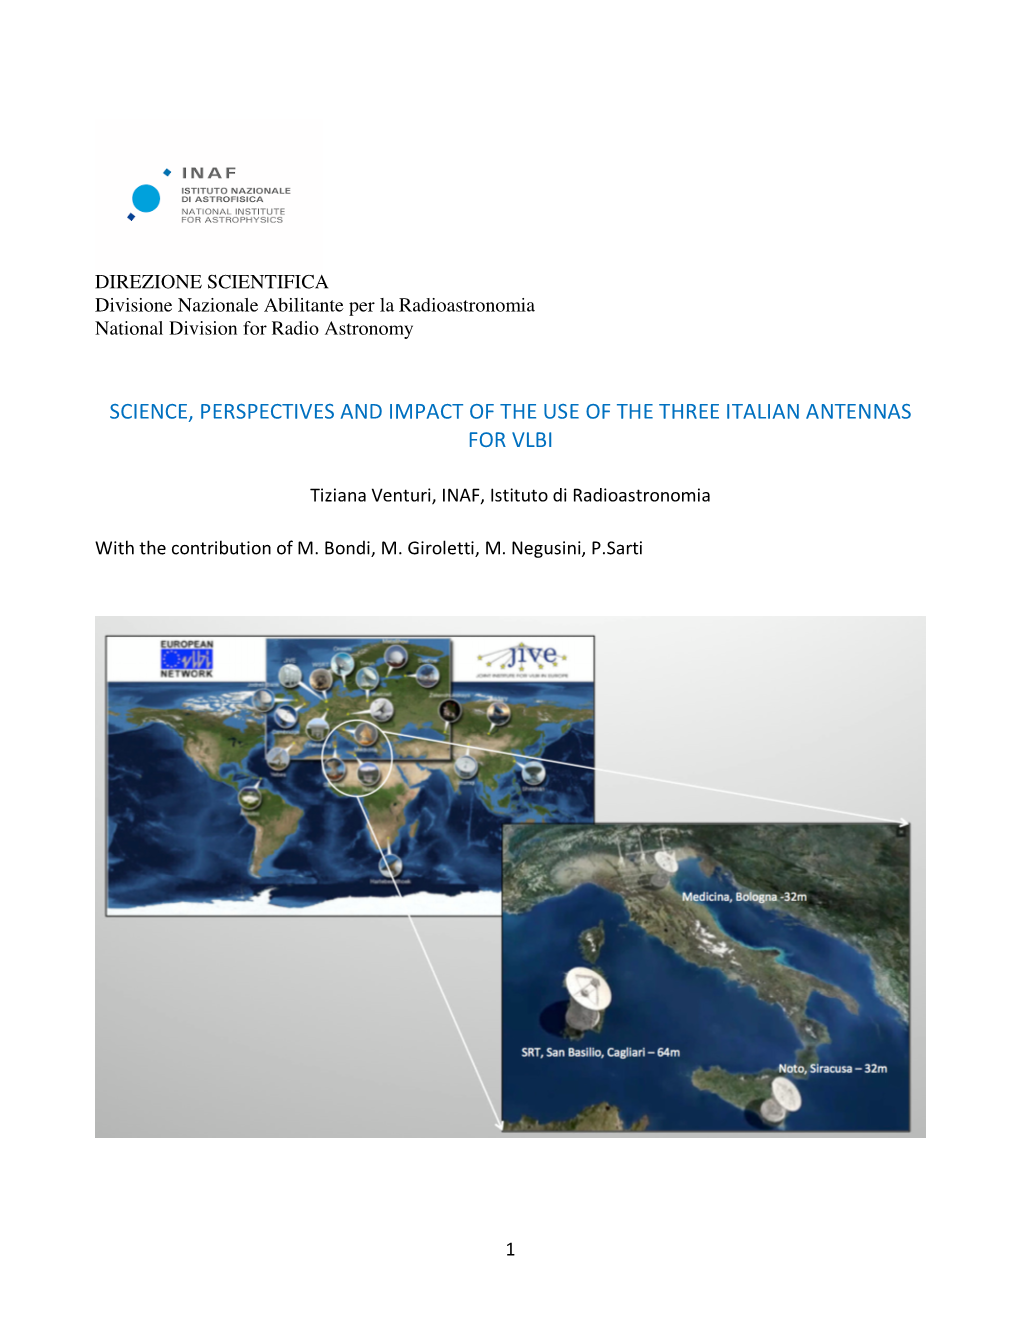 Science, Perspectives and Impact of the Use of the Three Italian Antennas for Vlbi